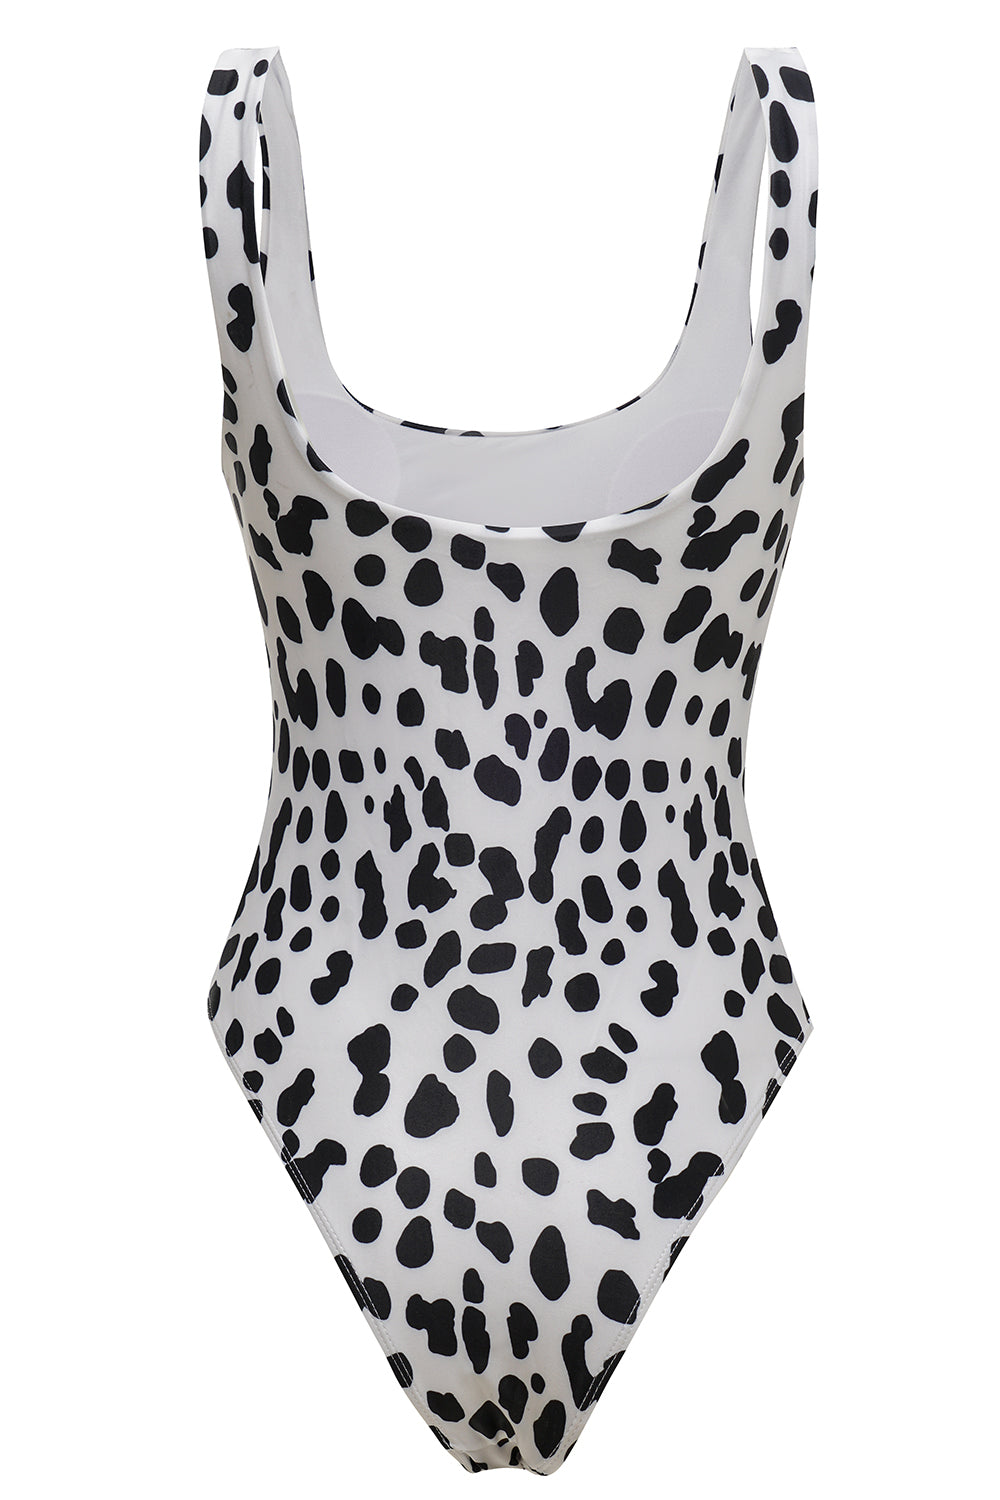 Grey Leopard Printed Swimsuits